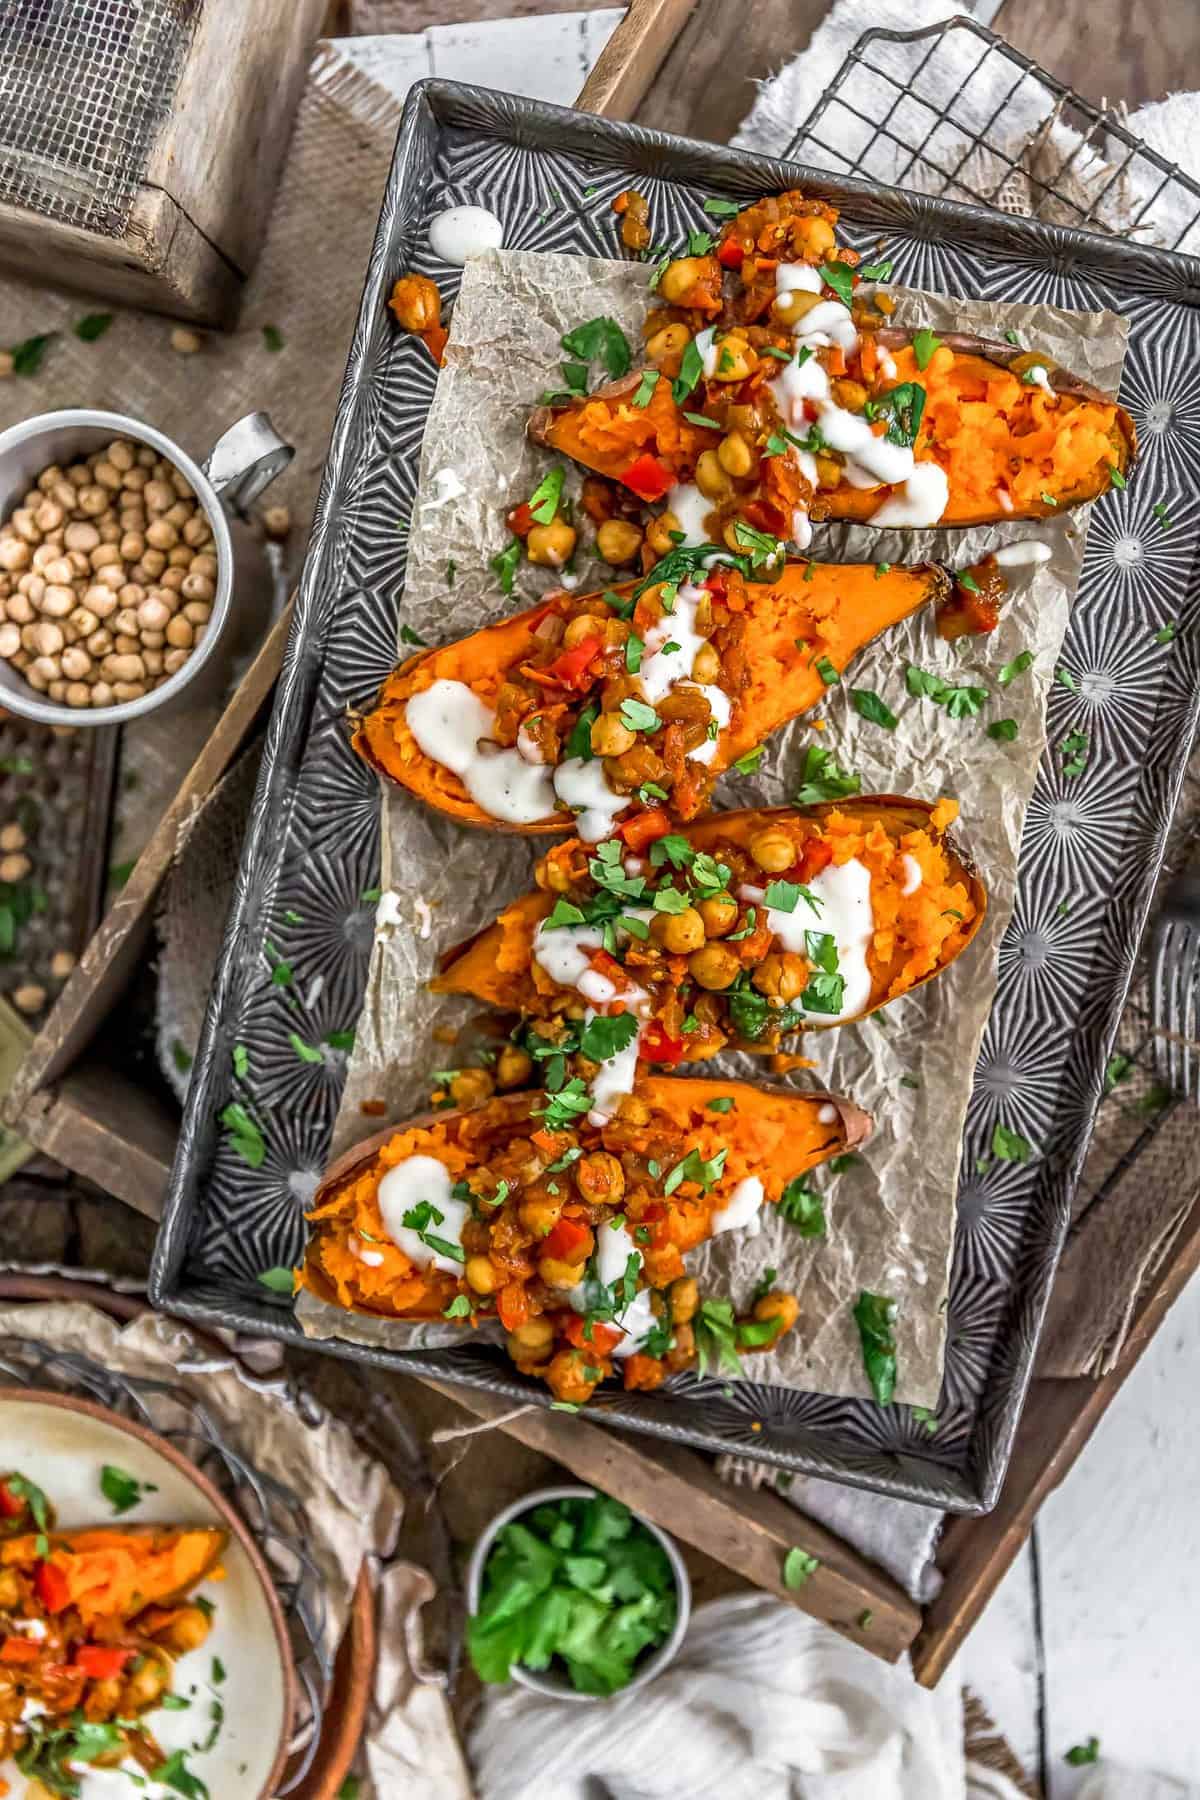 Moroccan Spiced Chickpeas and Garlic Sauce over sweet potatoes